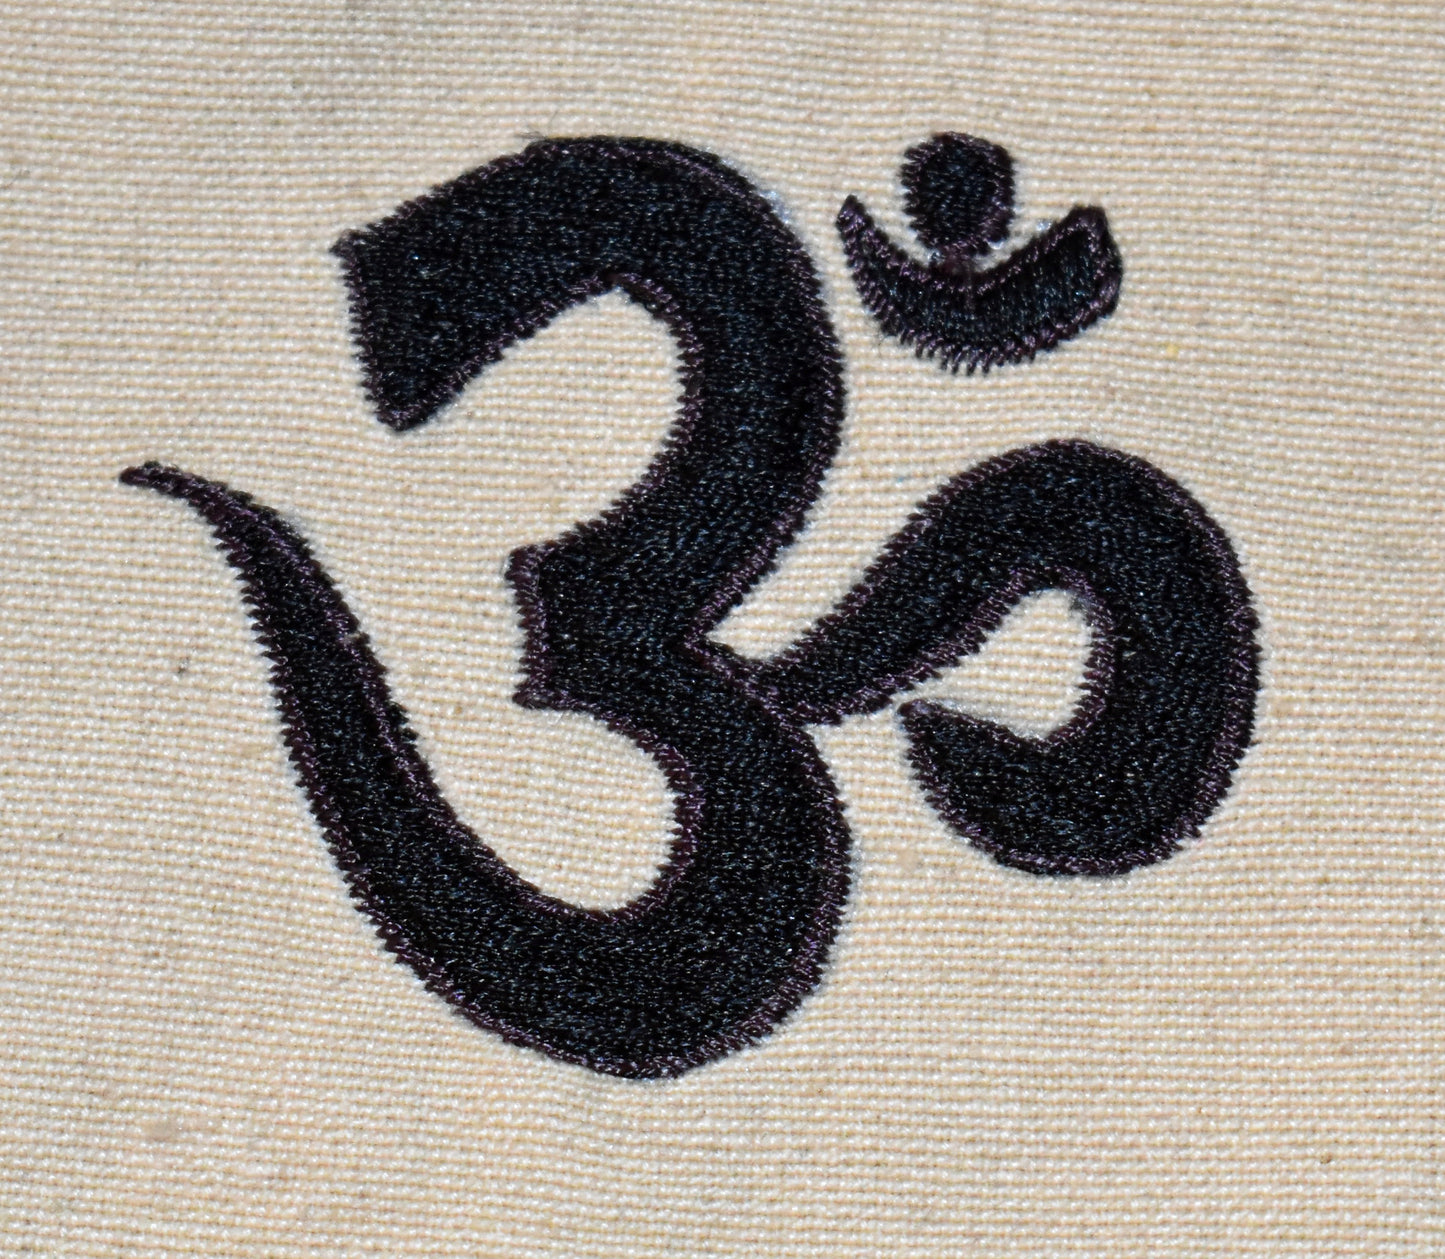 Embroidered Om Cotton Bum Bag